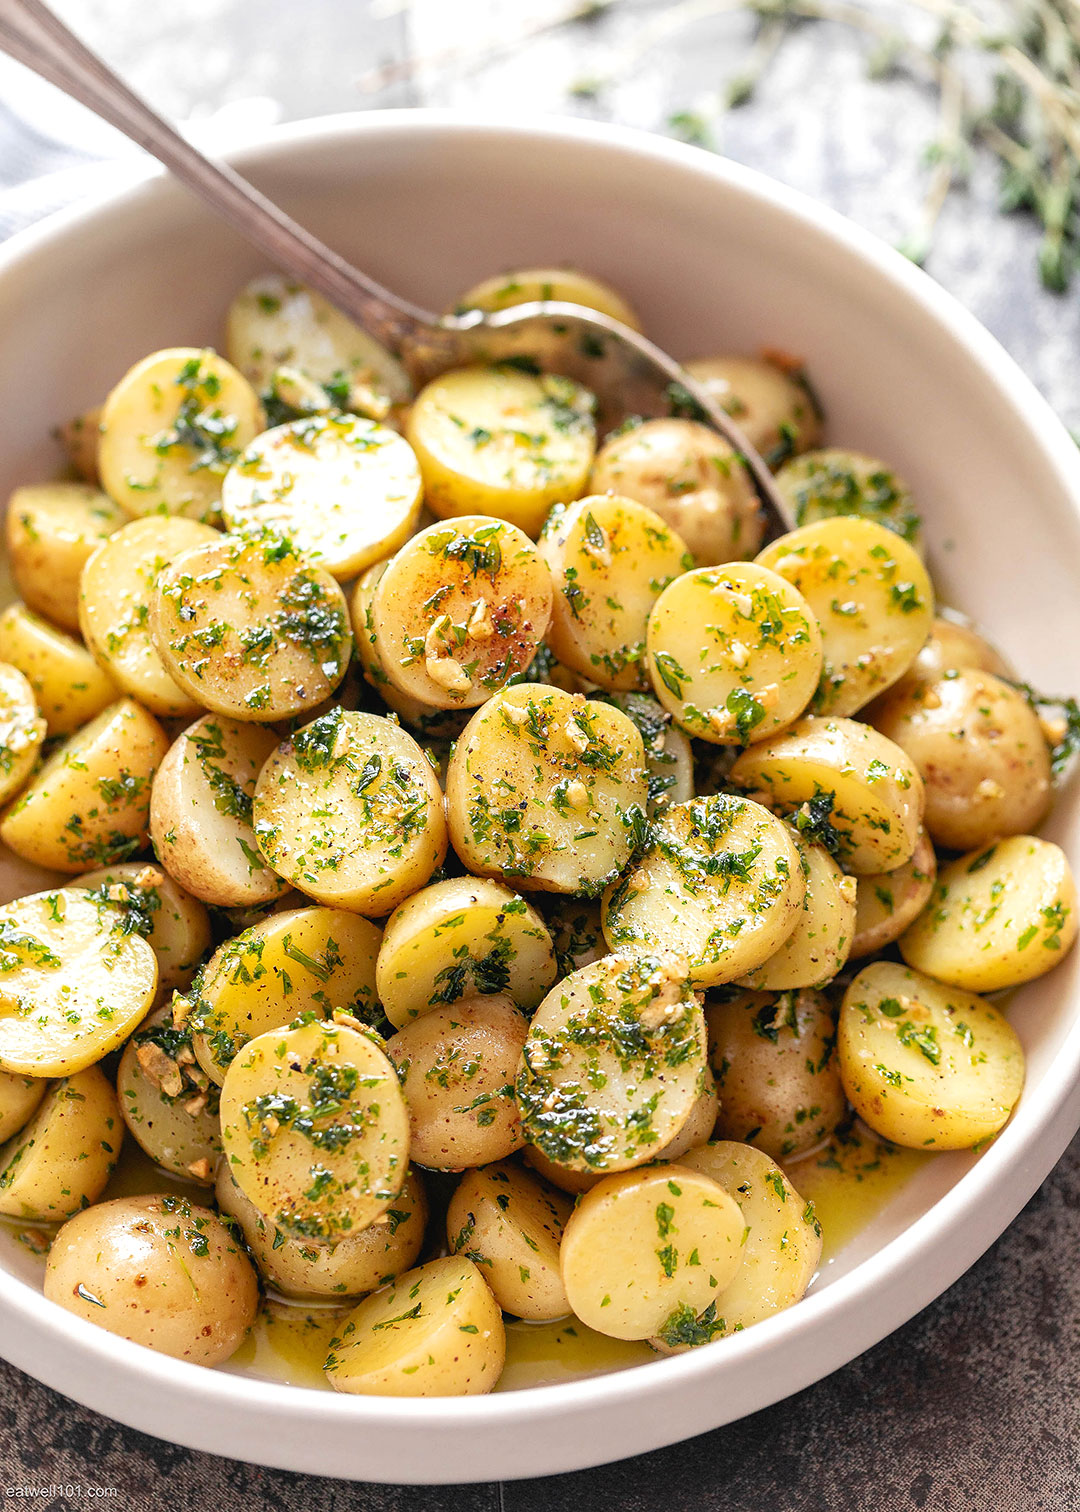 Fried Potatoes Recipe with Garlic Browned Butter – How to cook Baby ...